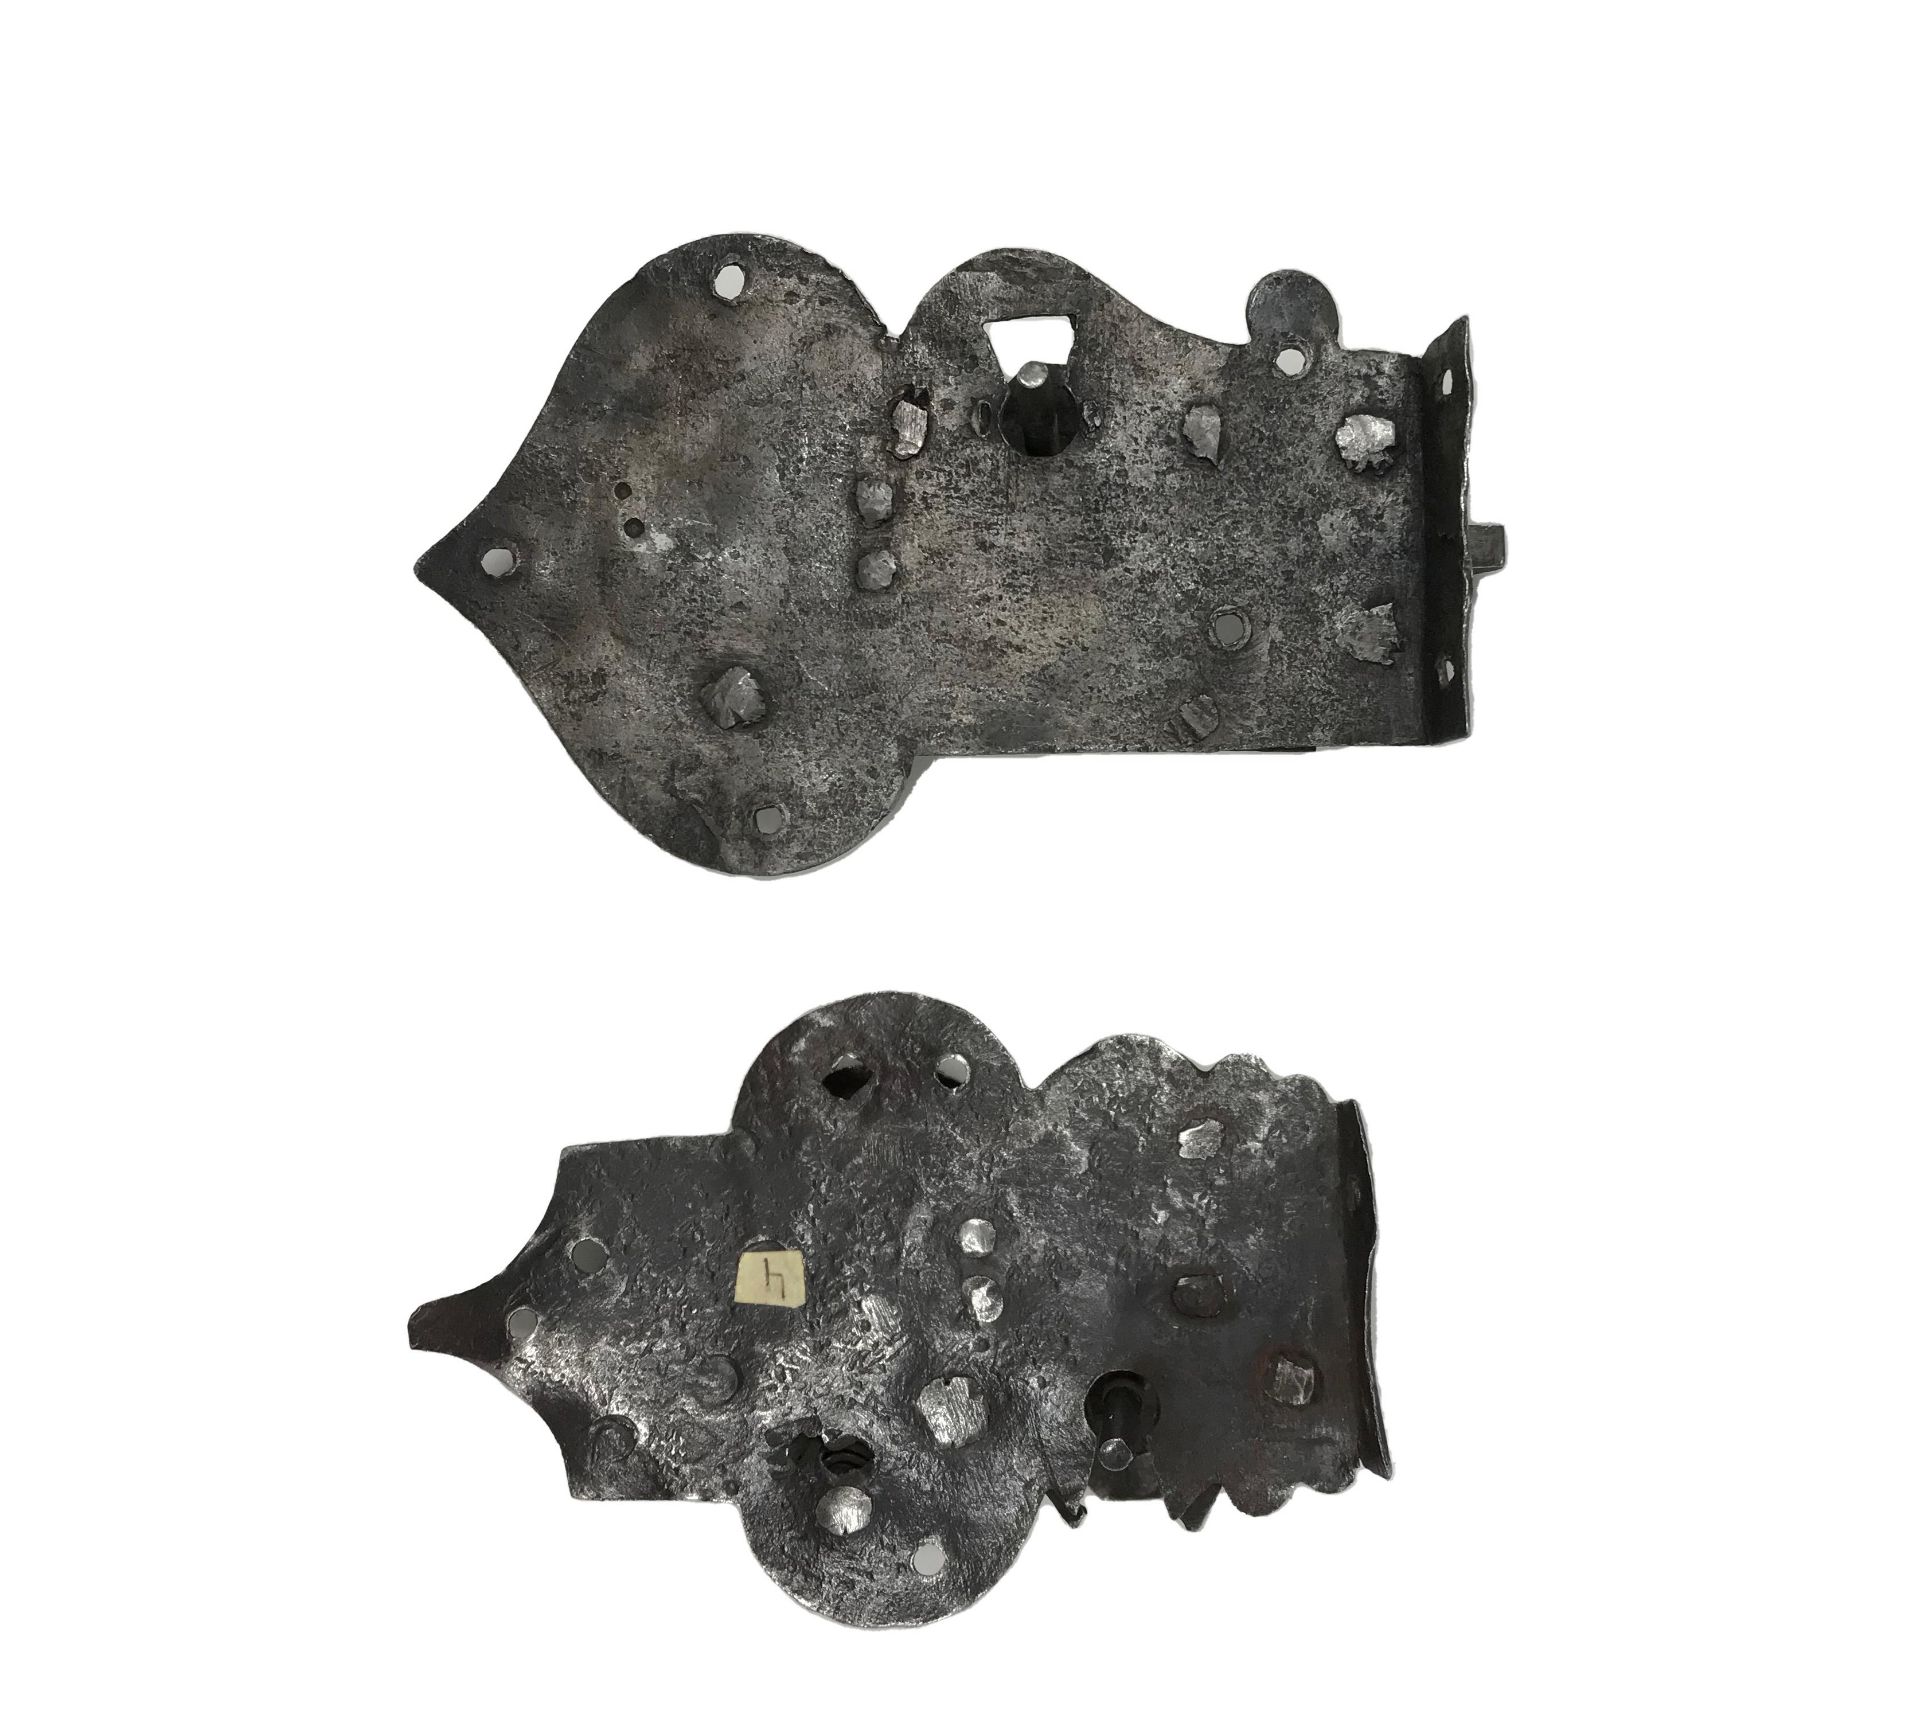 Two German locks8.18 x 13.92 cm and 8.05 x 12.28 cmPart of the chapter "From beyond the Rhine". - Image 2 of 2